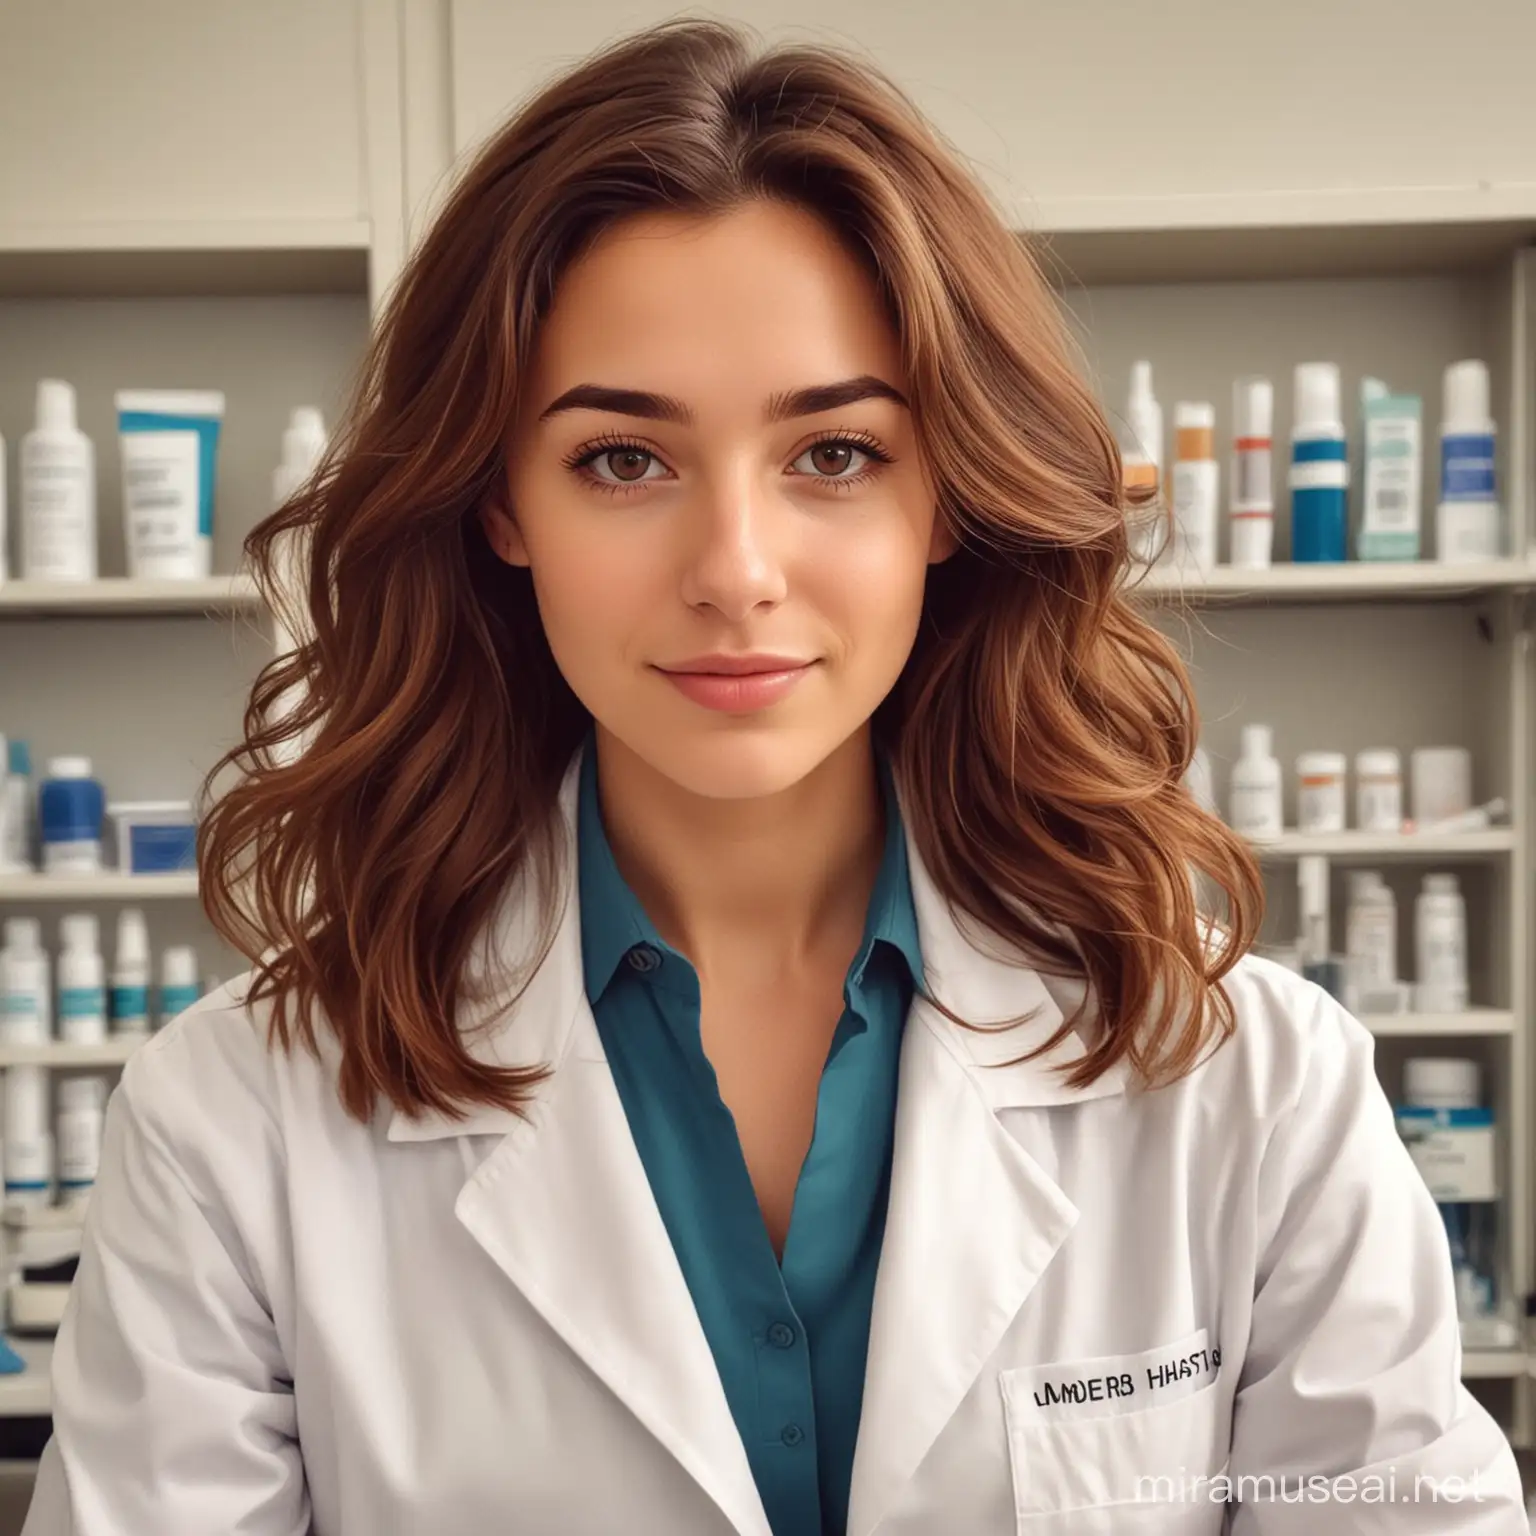 Female Scientist with Wavy Brown Hair and Brown Eyes in Laboratory Pharmacist Setting